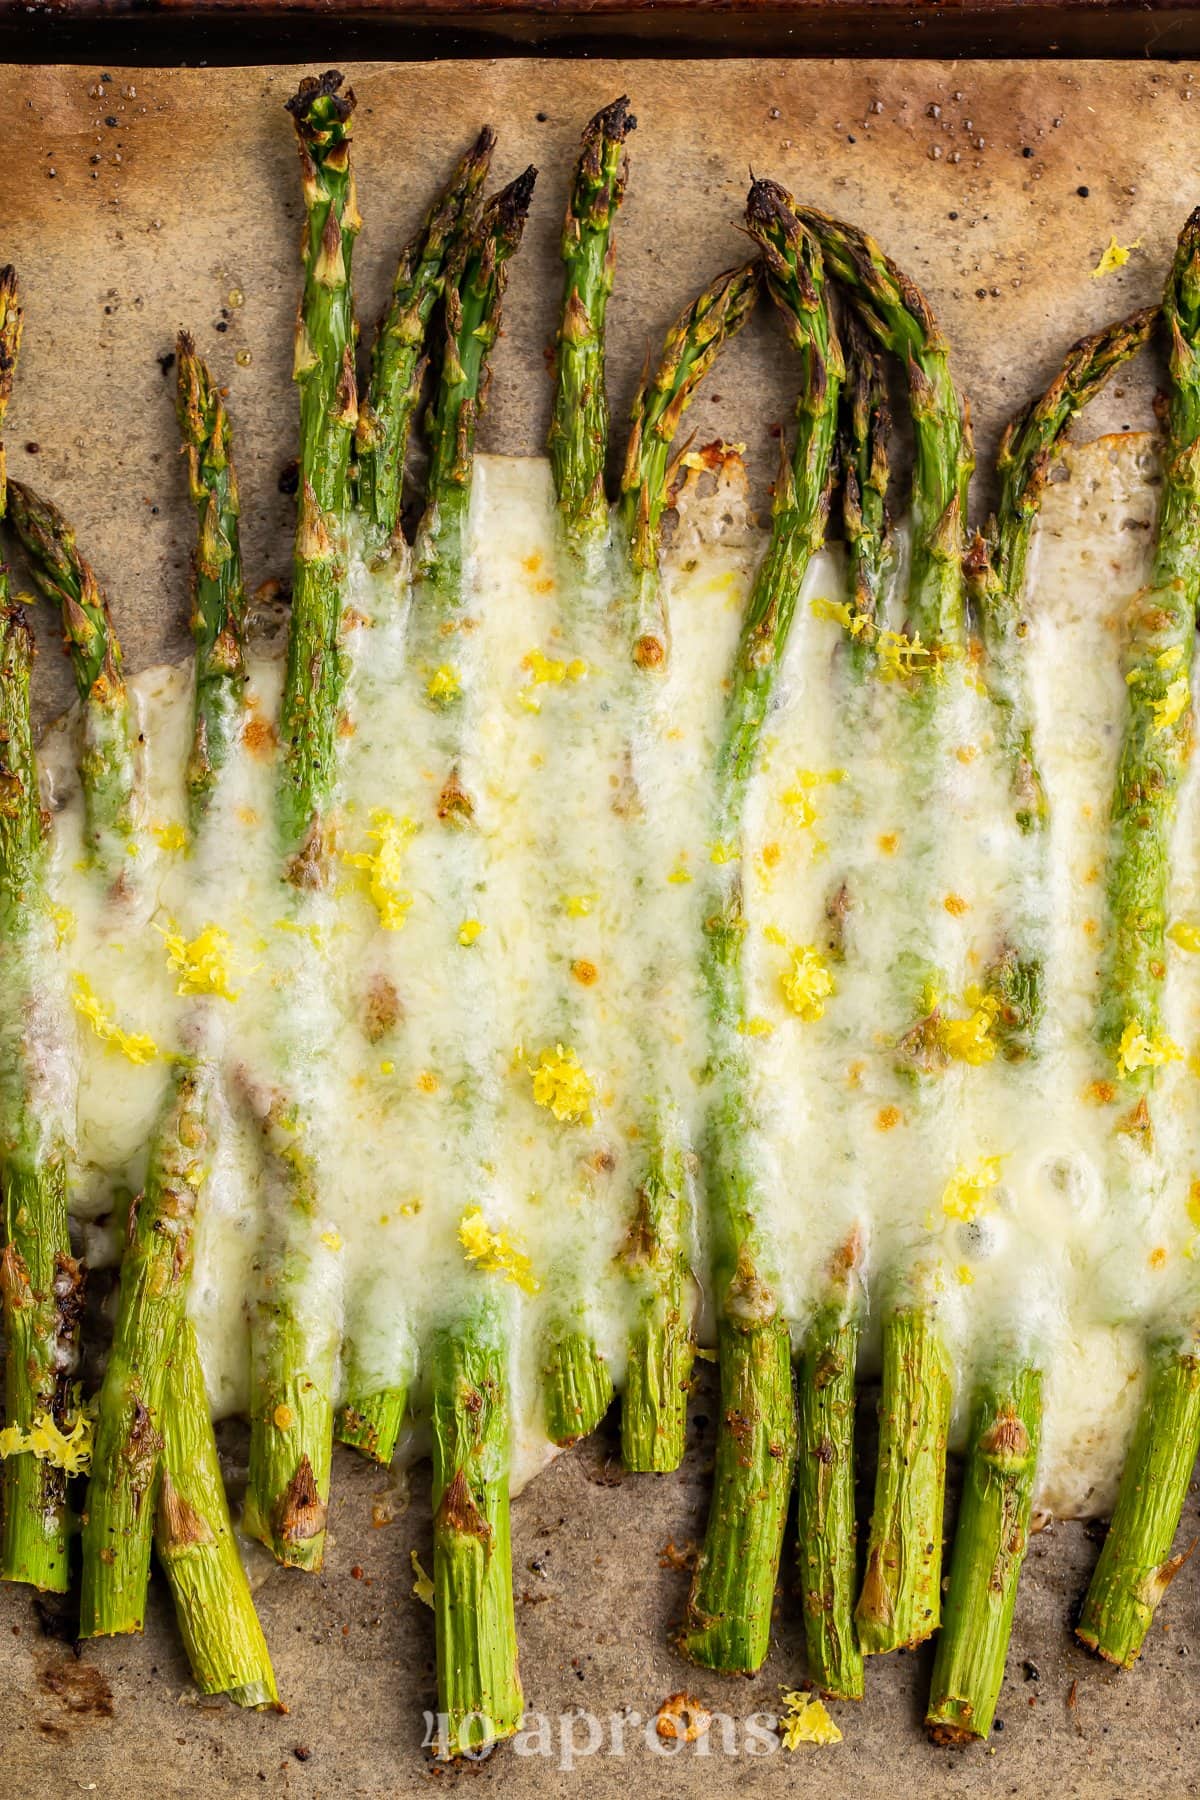 Overhead view of roasted asparagus spears covered in cheese on a baking sheet lined with parchment paper.